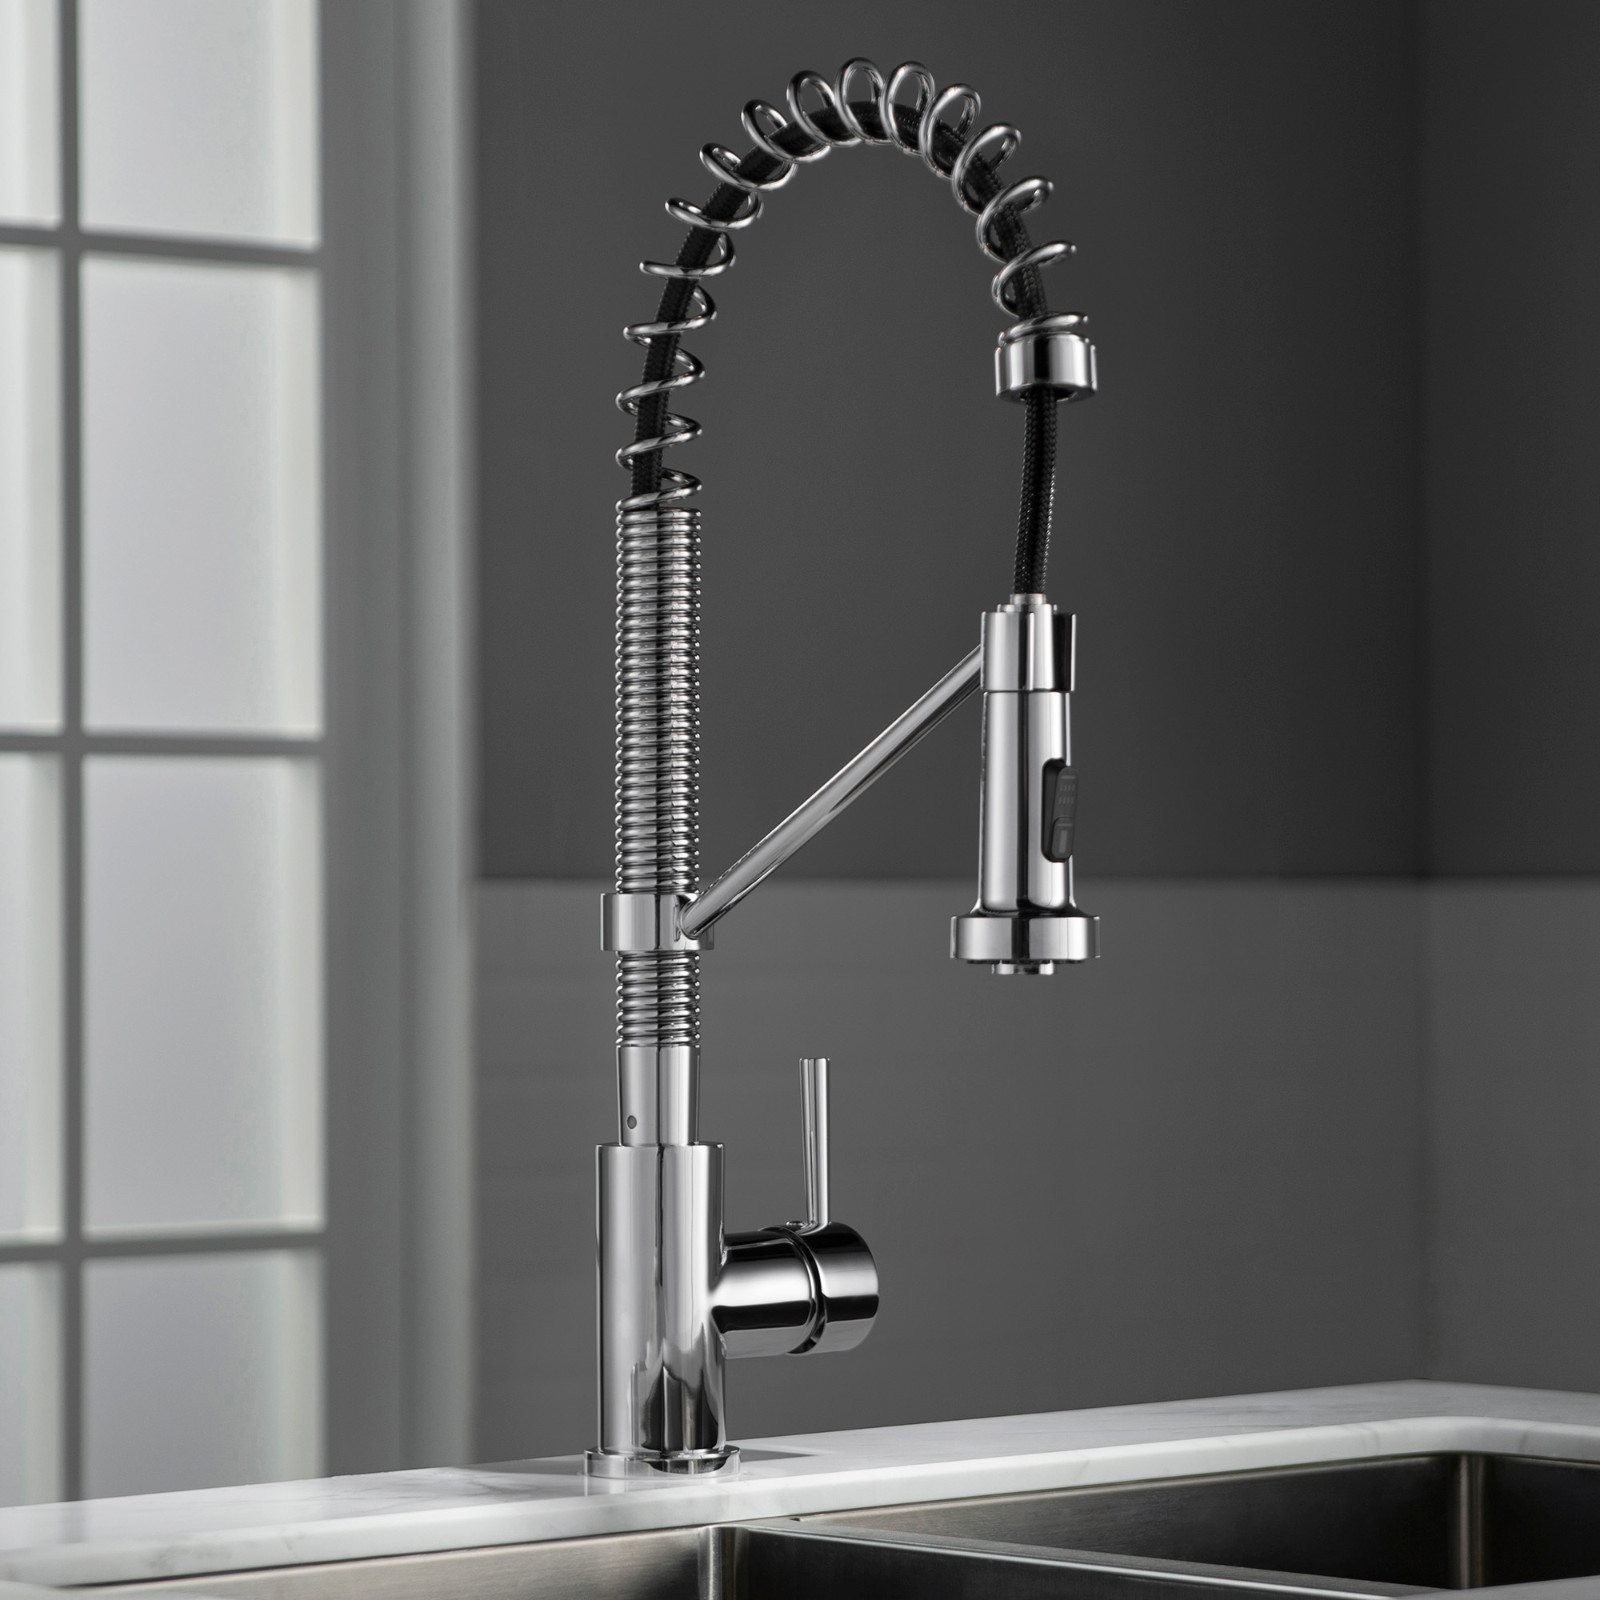  WOODBRIDGE WK010203CH Stainless Steel Single Handle Spring Coil Pre-Rinse Kitchen Faucet with Pull Down Sprayer, Chrome Finish_9455